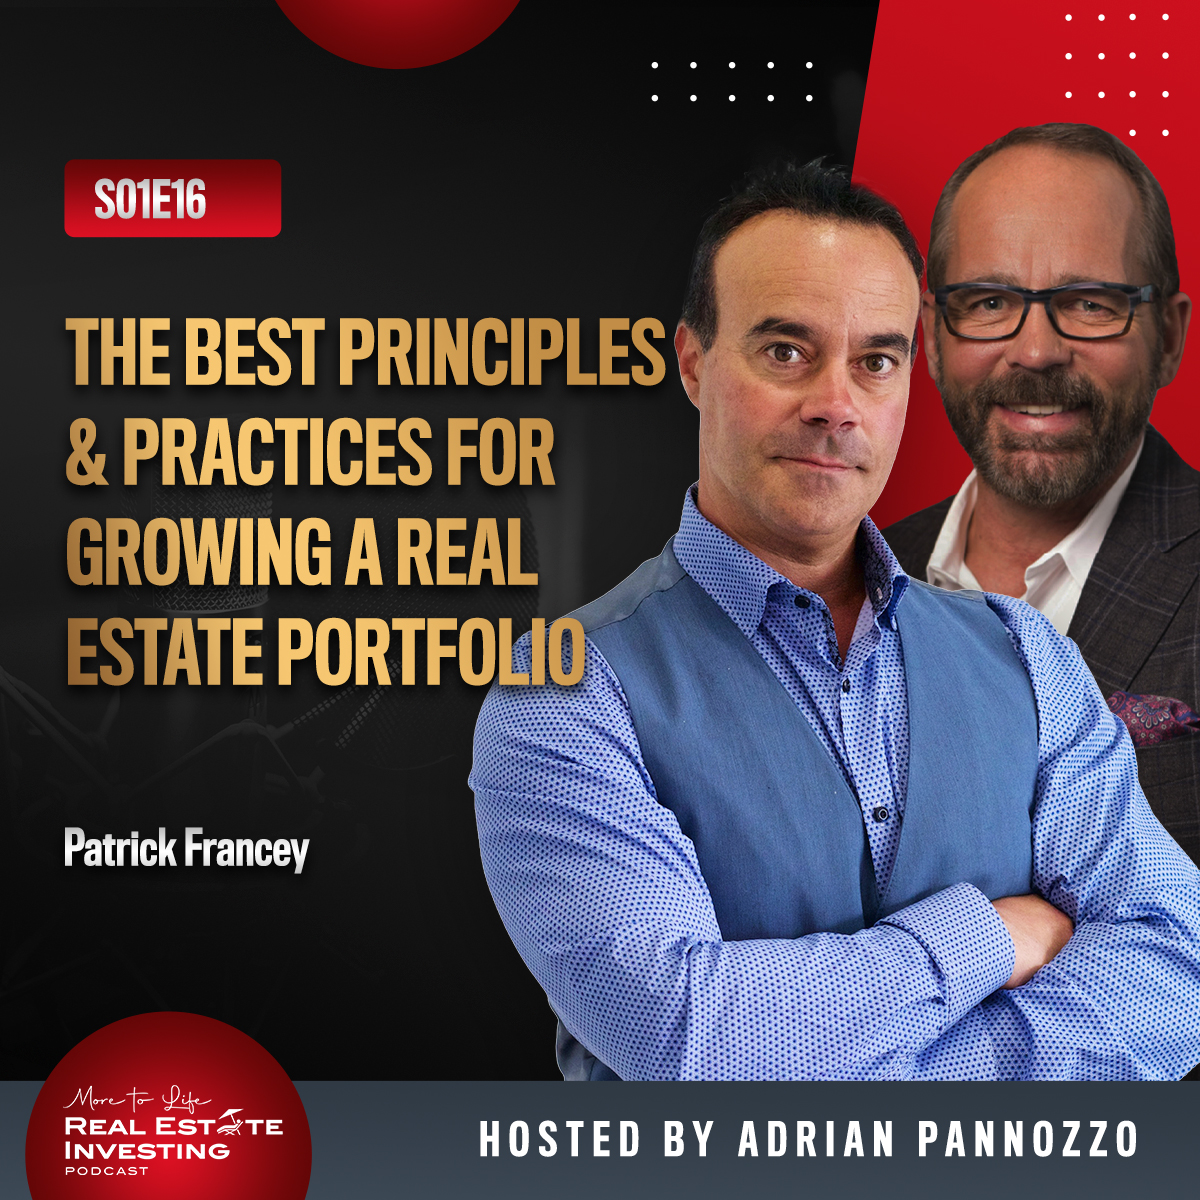 The Best Principles & Practices for Growing a Real Estate Portfolio with Patrick Francey